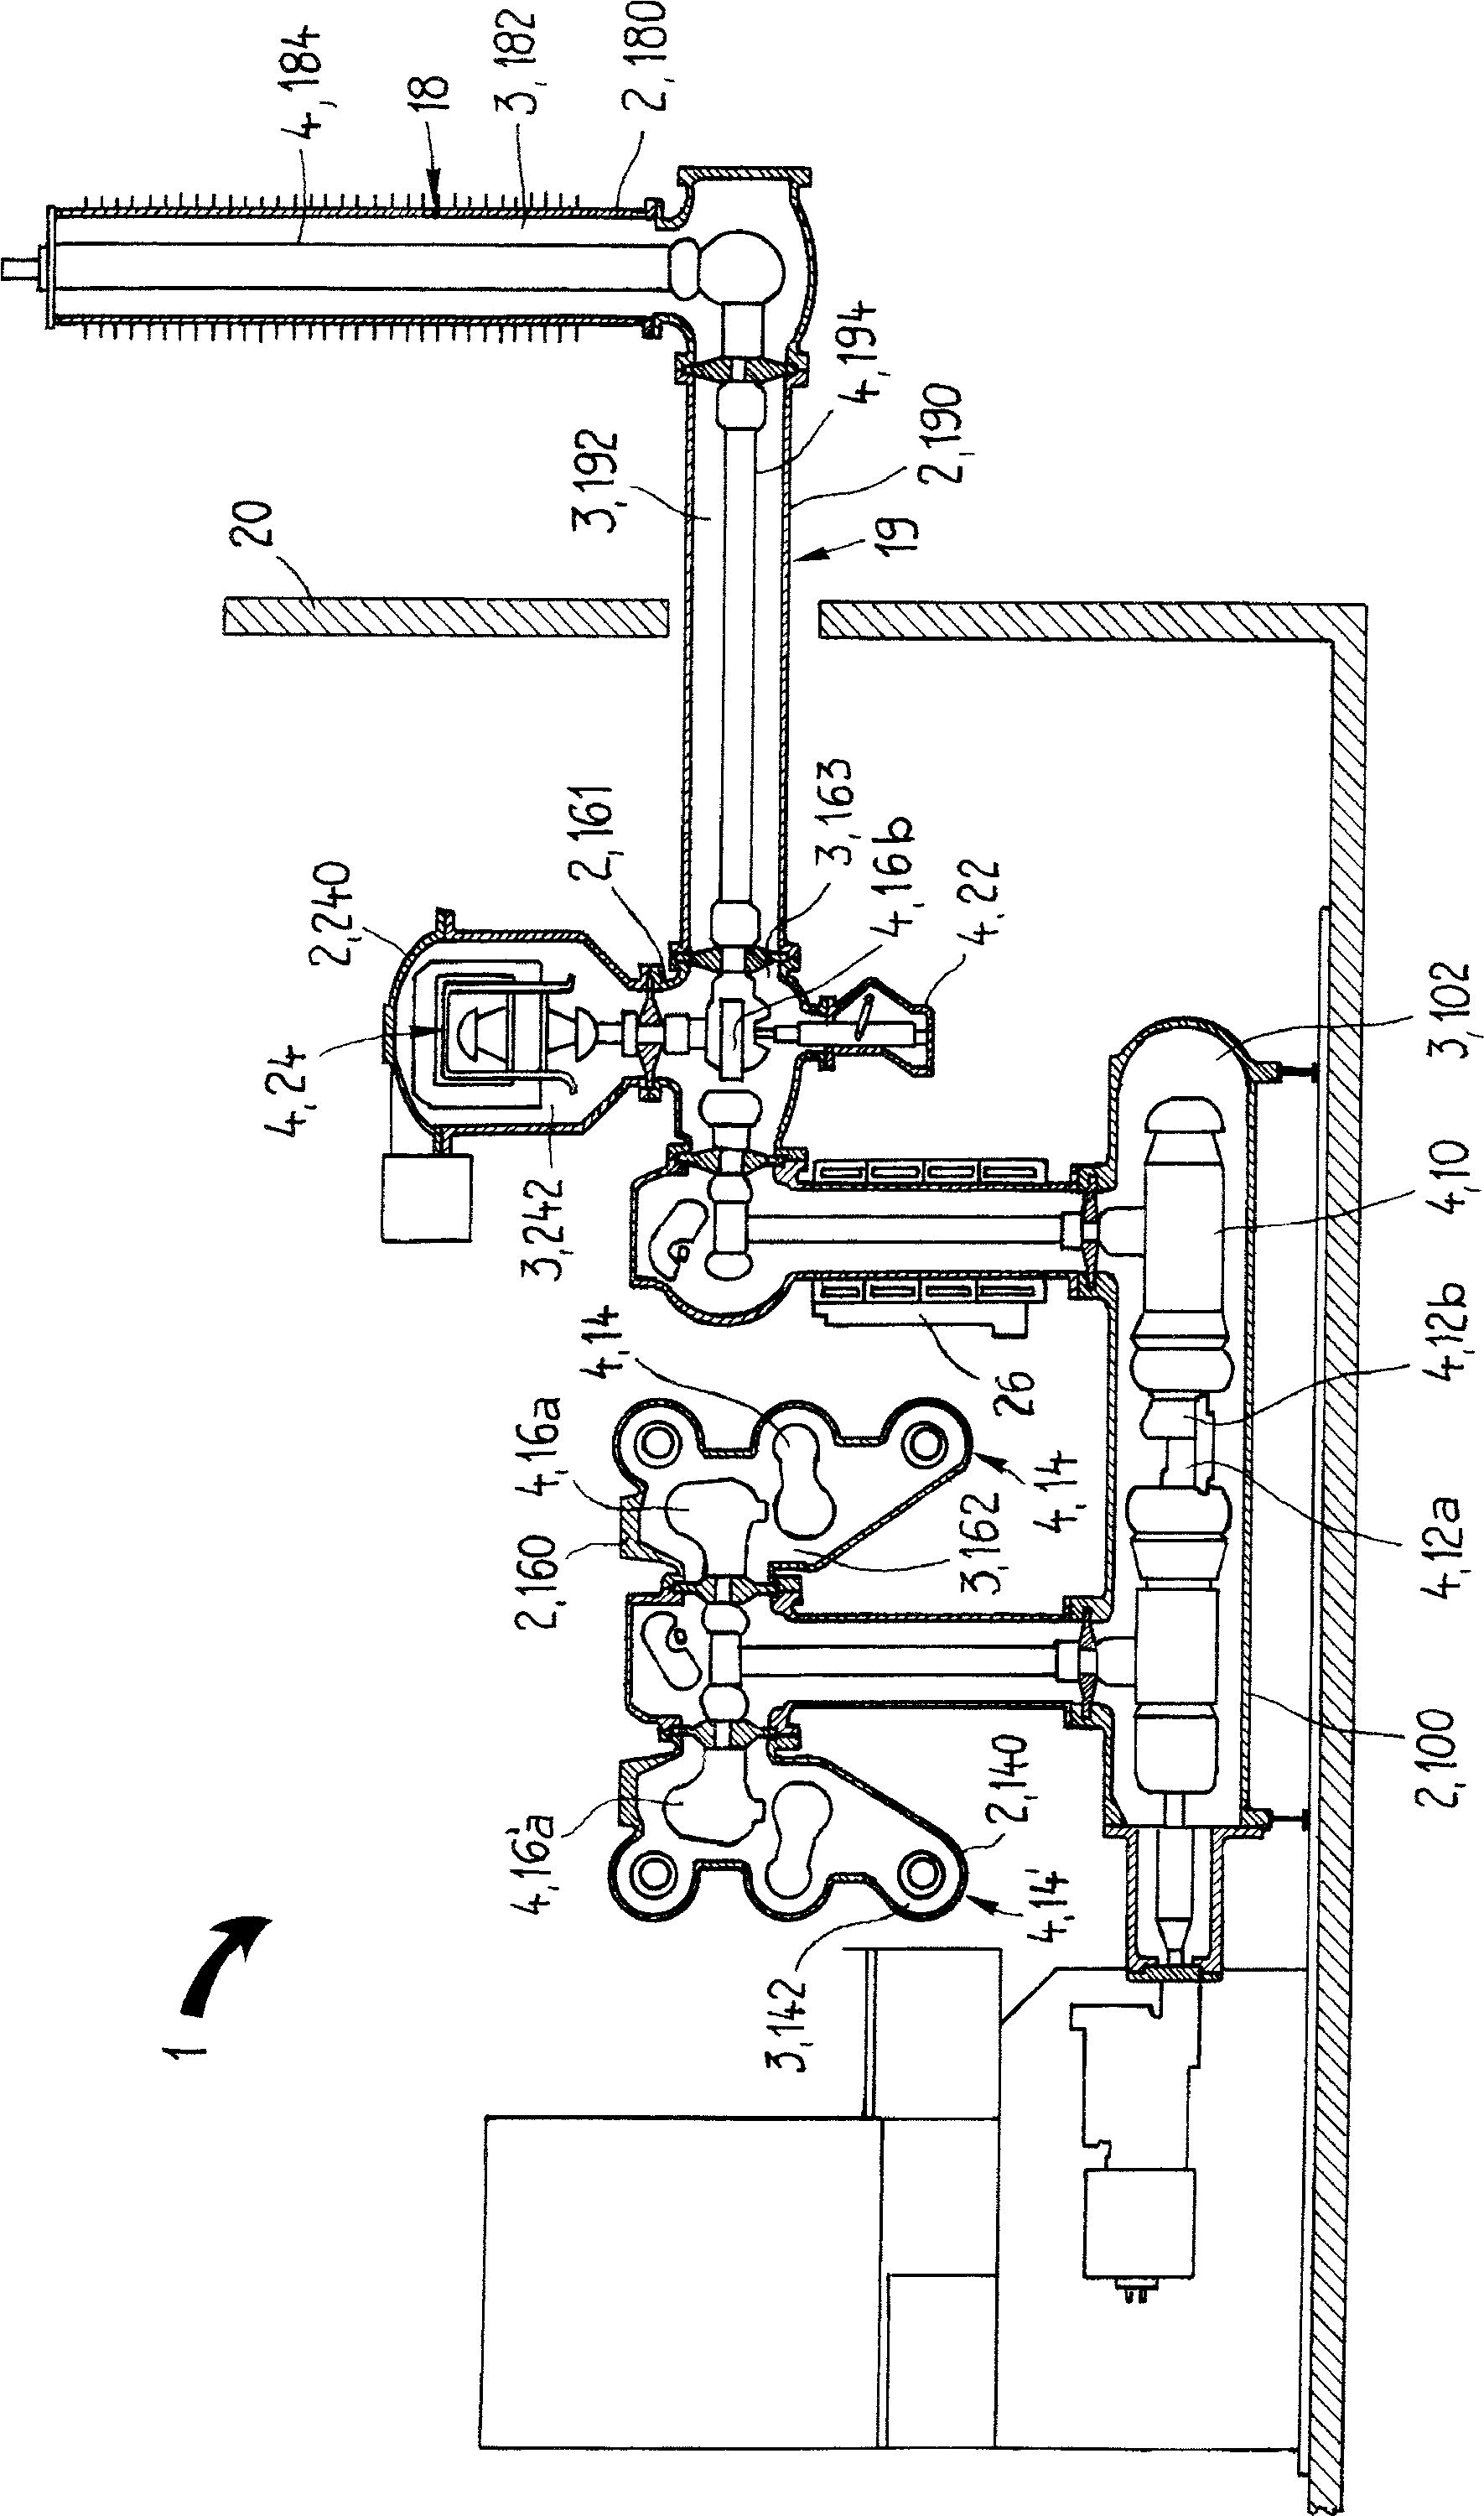 Electrical device for producing, distributing and/or using electric energy